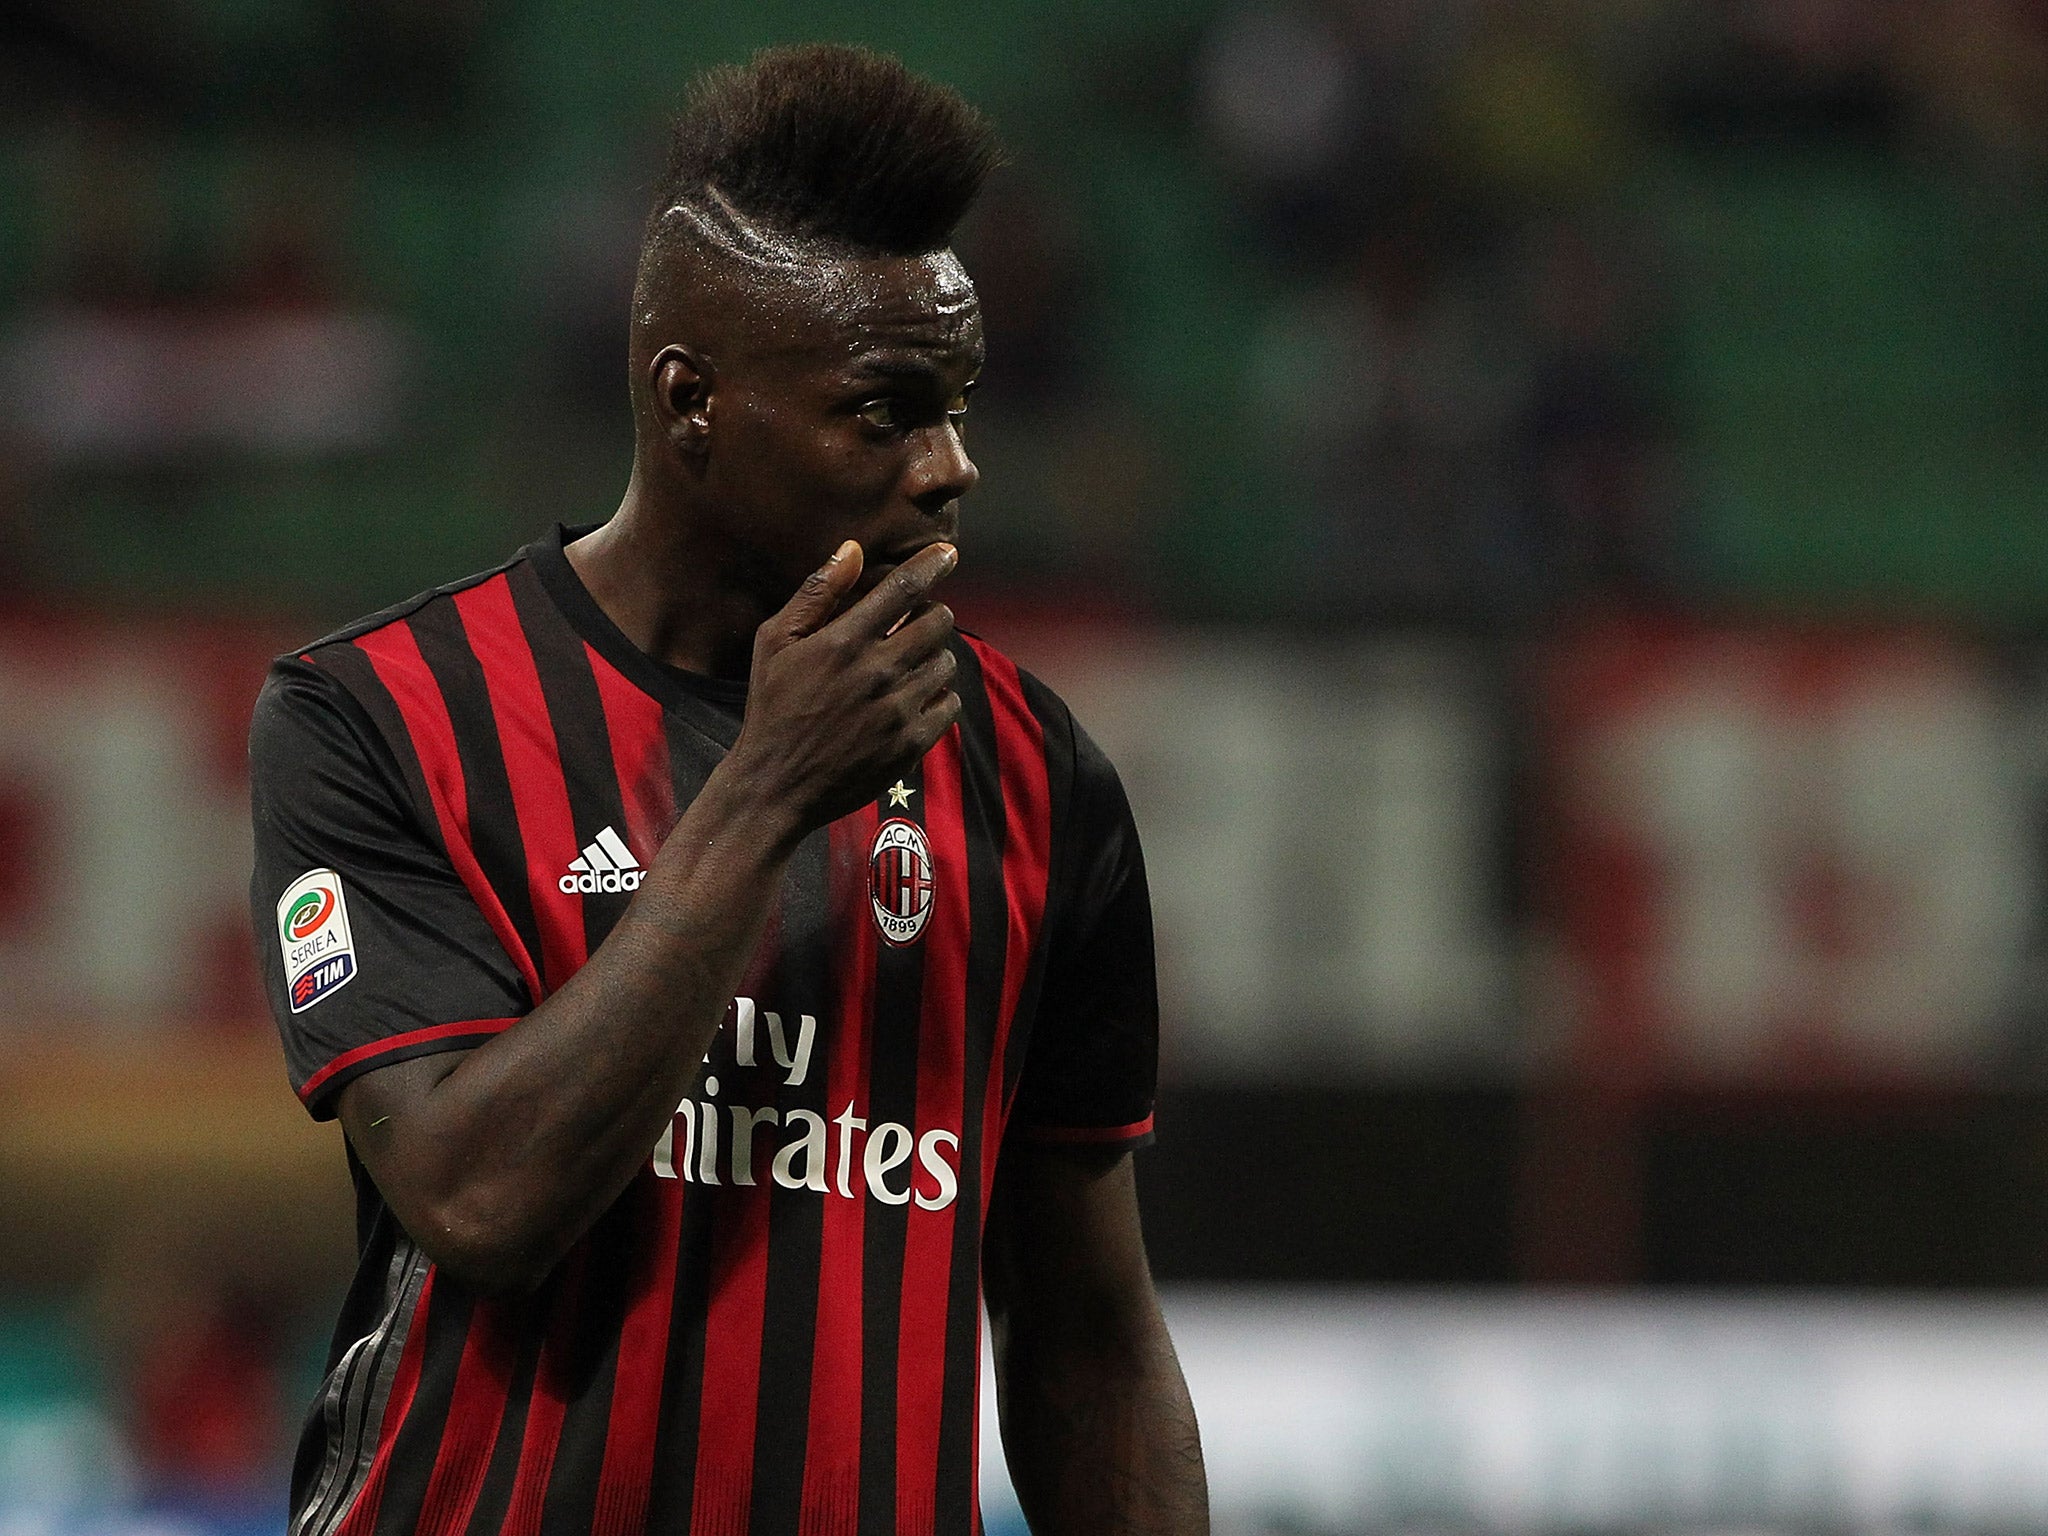 Mario Balotelli will not be signed permanently by AC Milan, says Silvio Berlusconi